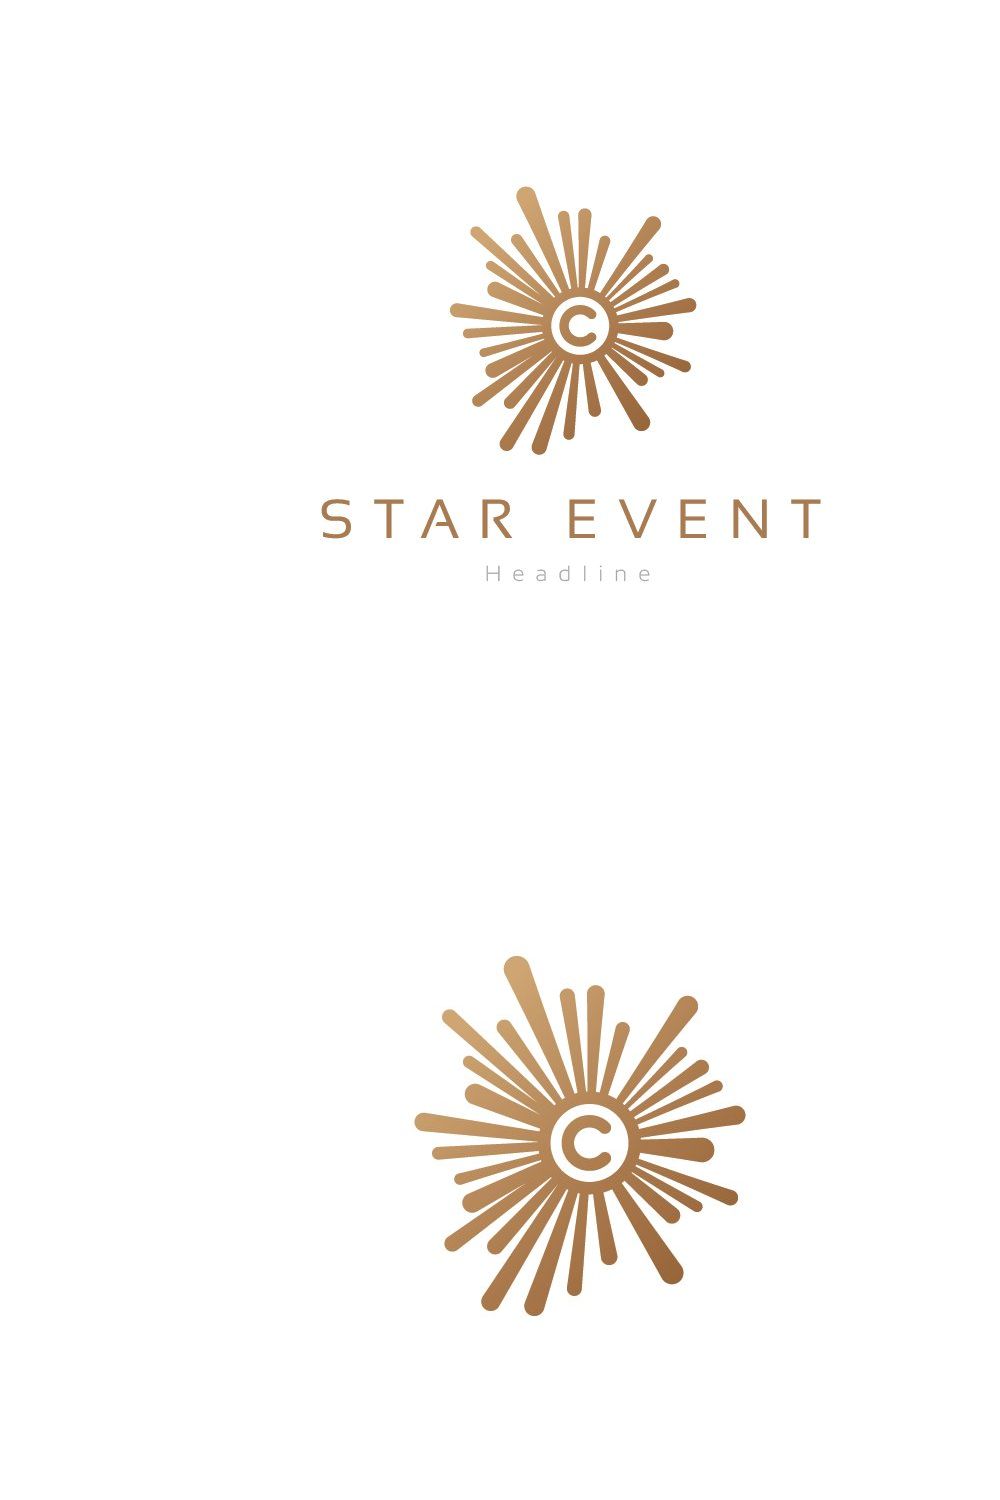 Star event company logo. pinterest preview image.